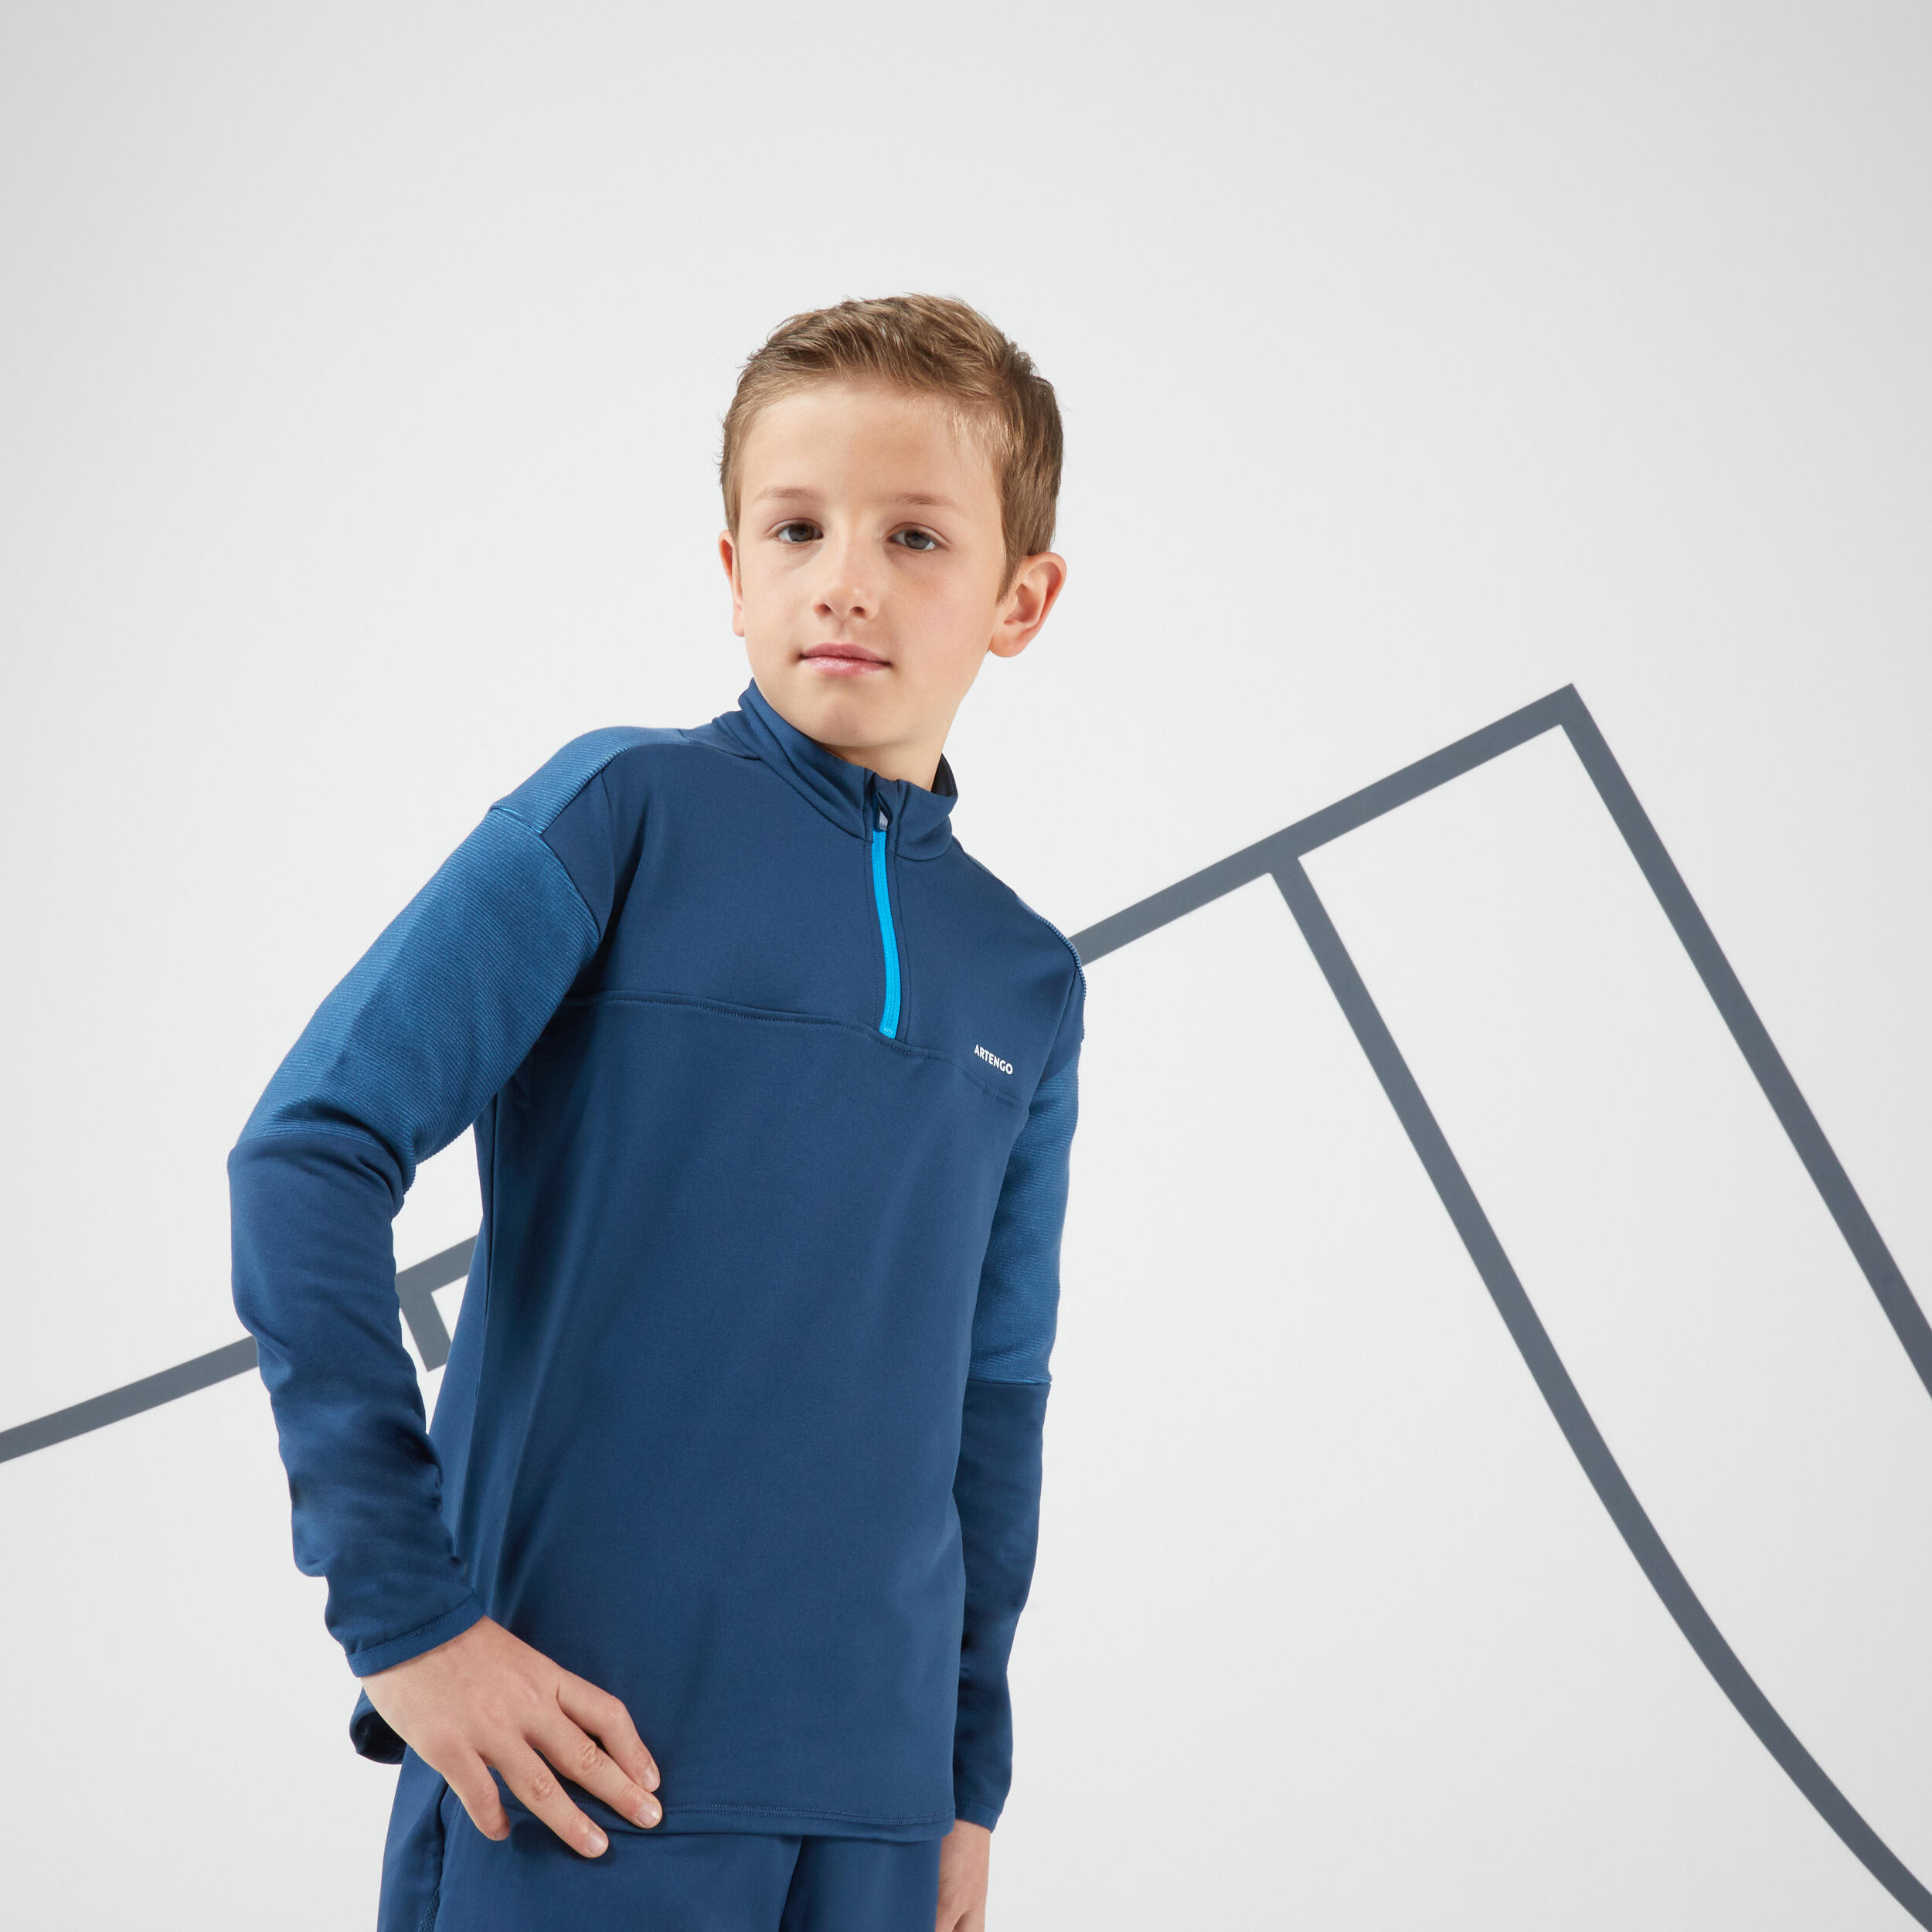 Boys' Long-Sleeved 1/2 Zip Thermal Tennis T-Shirt - Turquoise 3/7